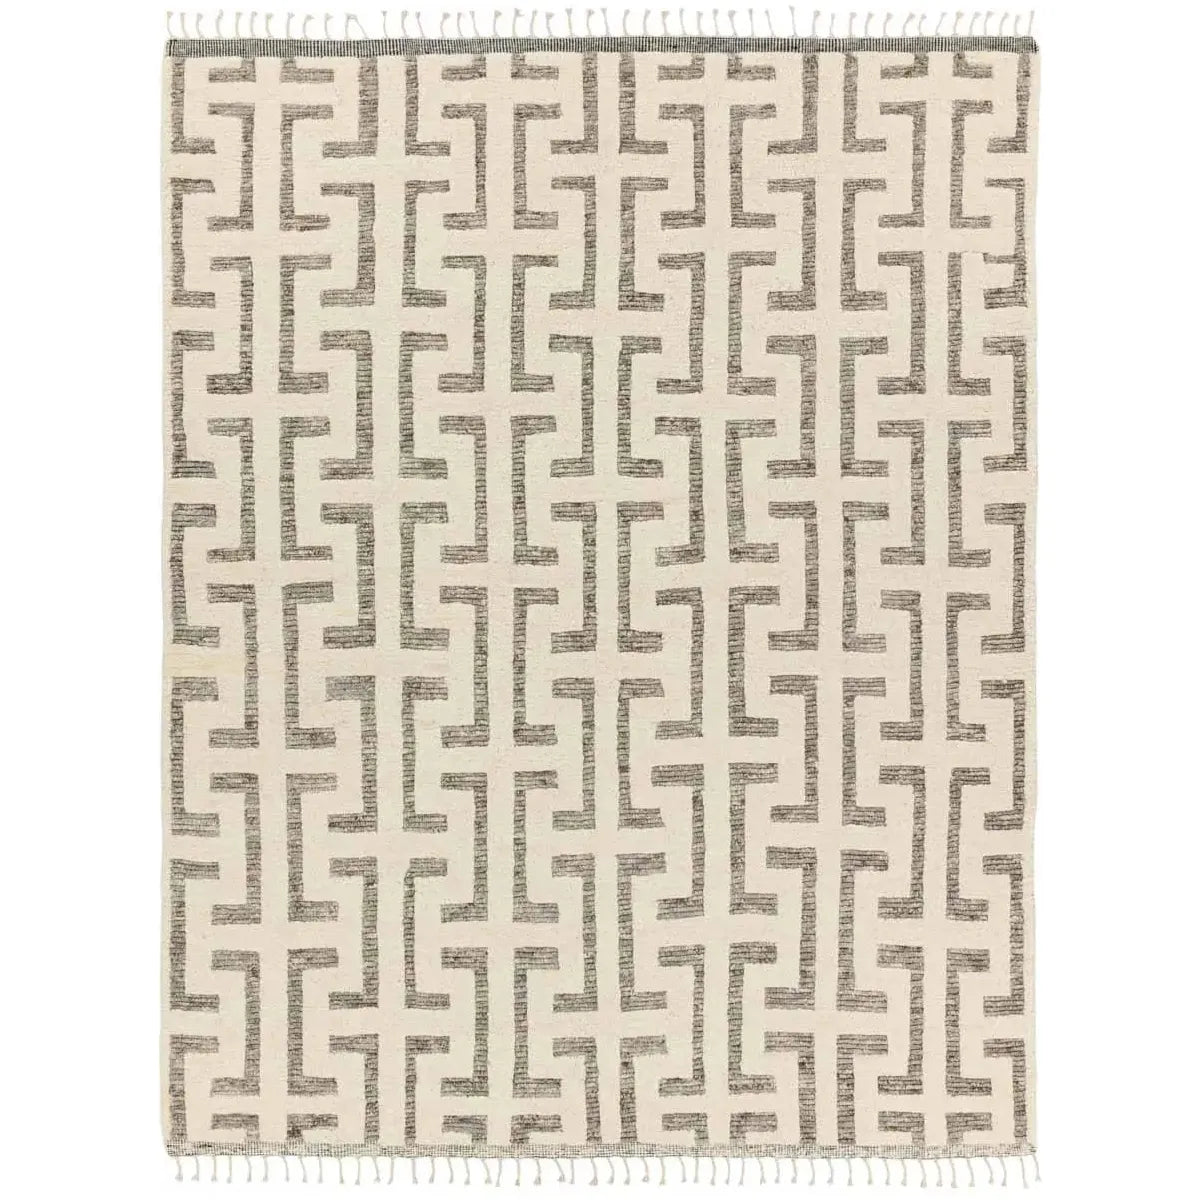 The Keoka Semra Rug boasts a fresh take on classic Afghani hand-knotted textiles. In rich, grounding tones of gray and ivory, the stylish contrast of the rug anchors room with bold yet neutral appeal. Amethyst Home provides interior design services, furniture, rugs, and lighting in the Seattle metro area.